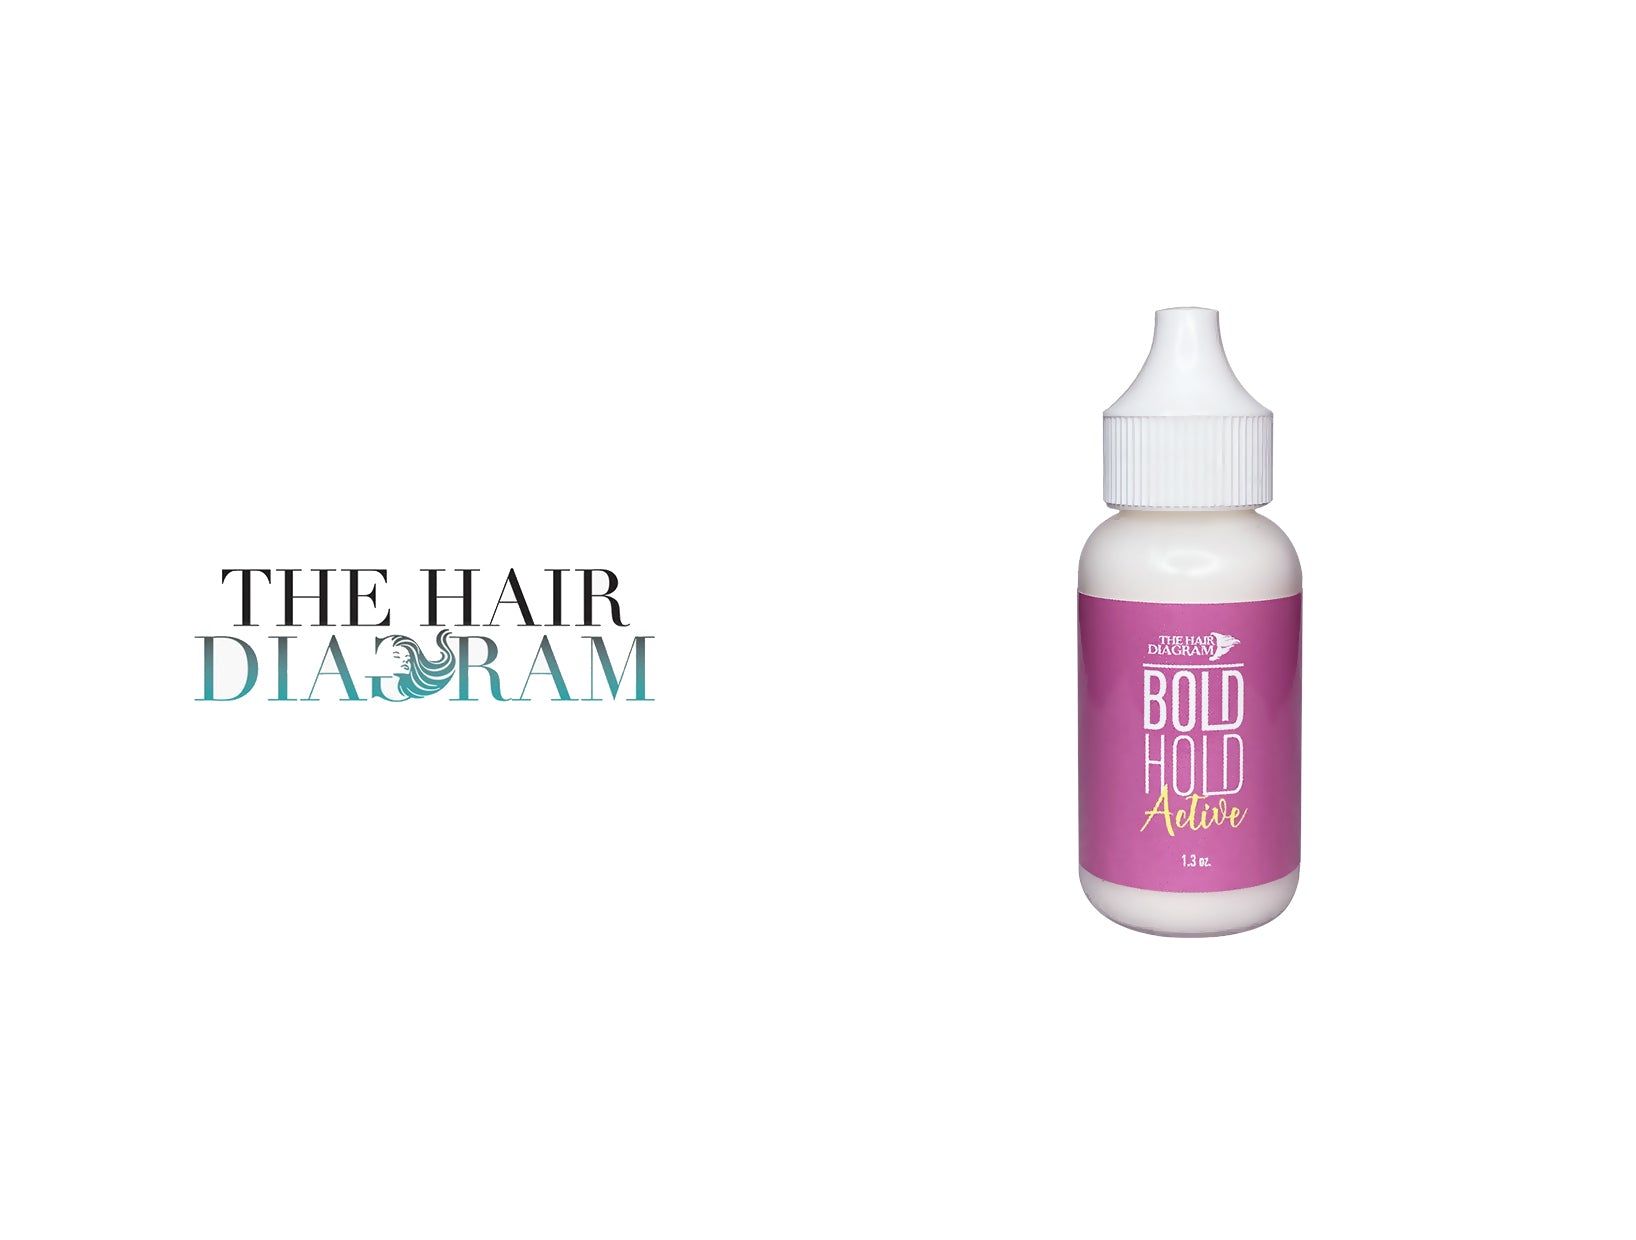 THE HAIR DIAGRAM BOLD HOLD ACTIVE LACE GLUE ADHESIVE 1.3oz